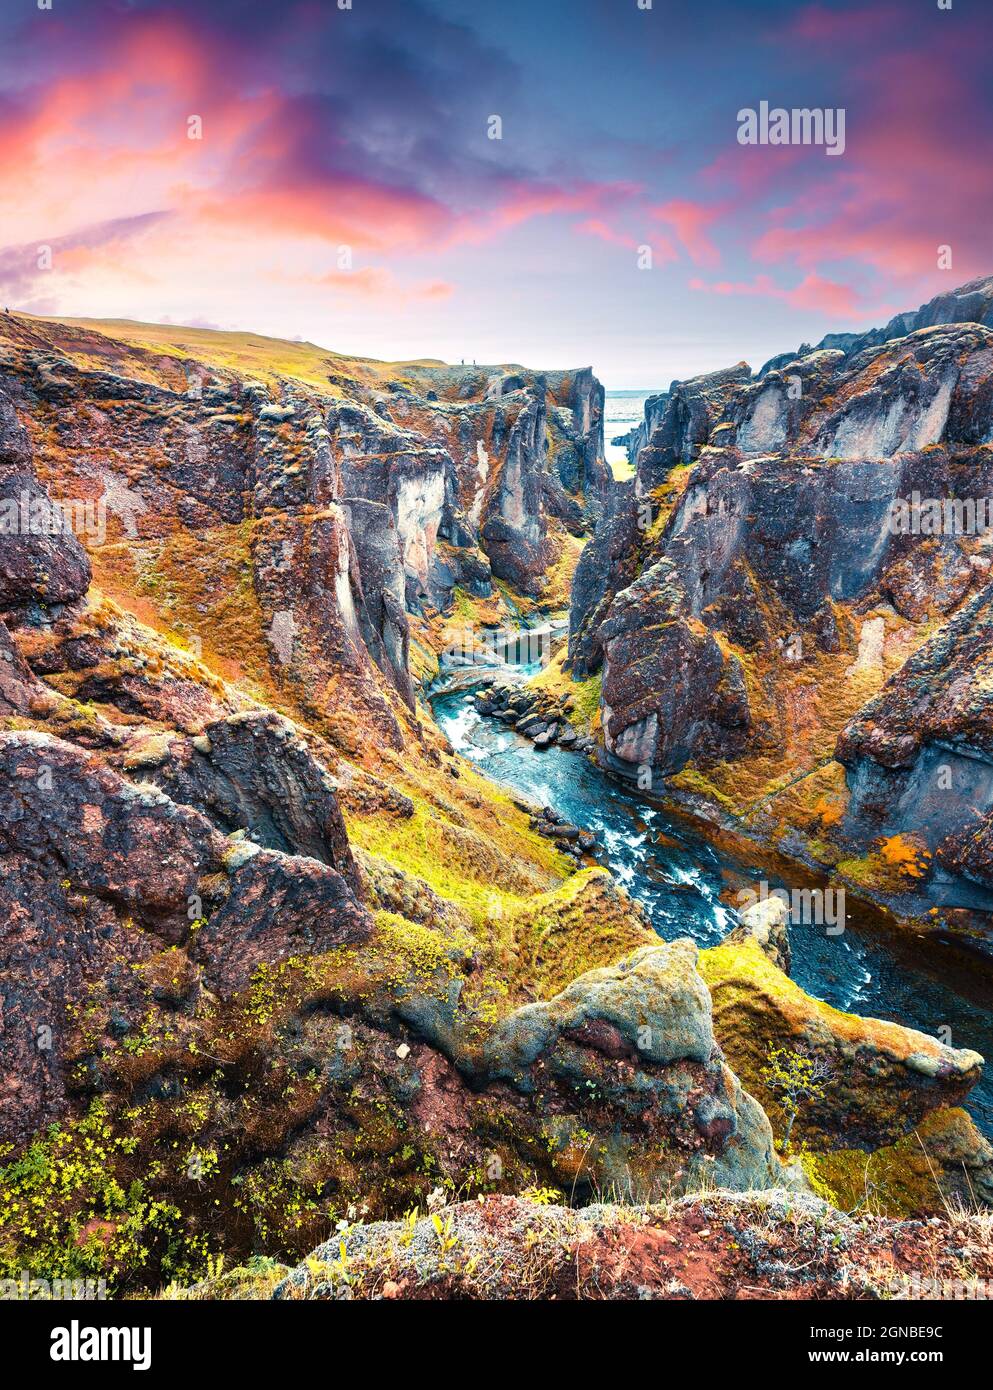 Majestic view of Fjadrargljufur canyon and river. Colorful summer sunrise in South east Iceland, Europe. Artistic style post processed photo. Stock Photo